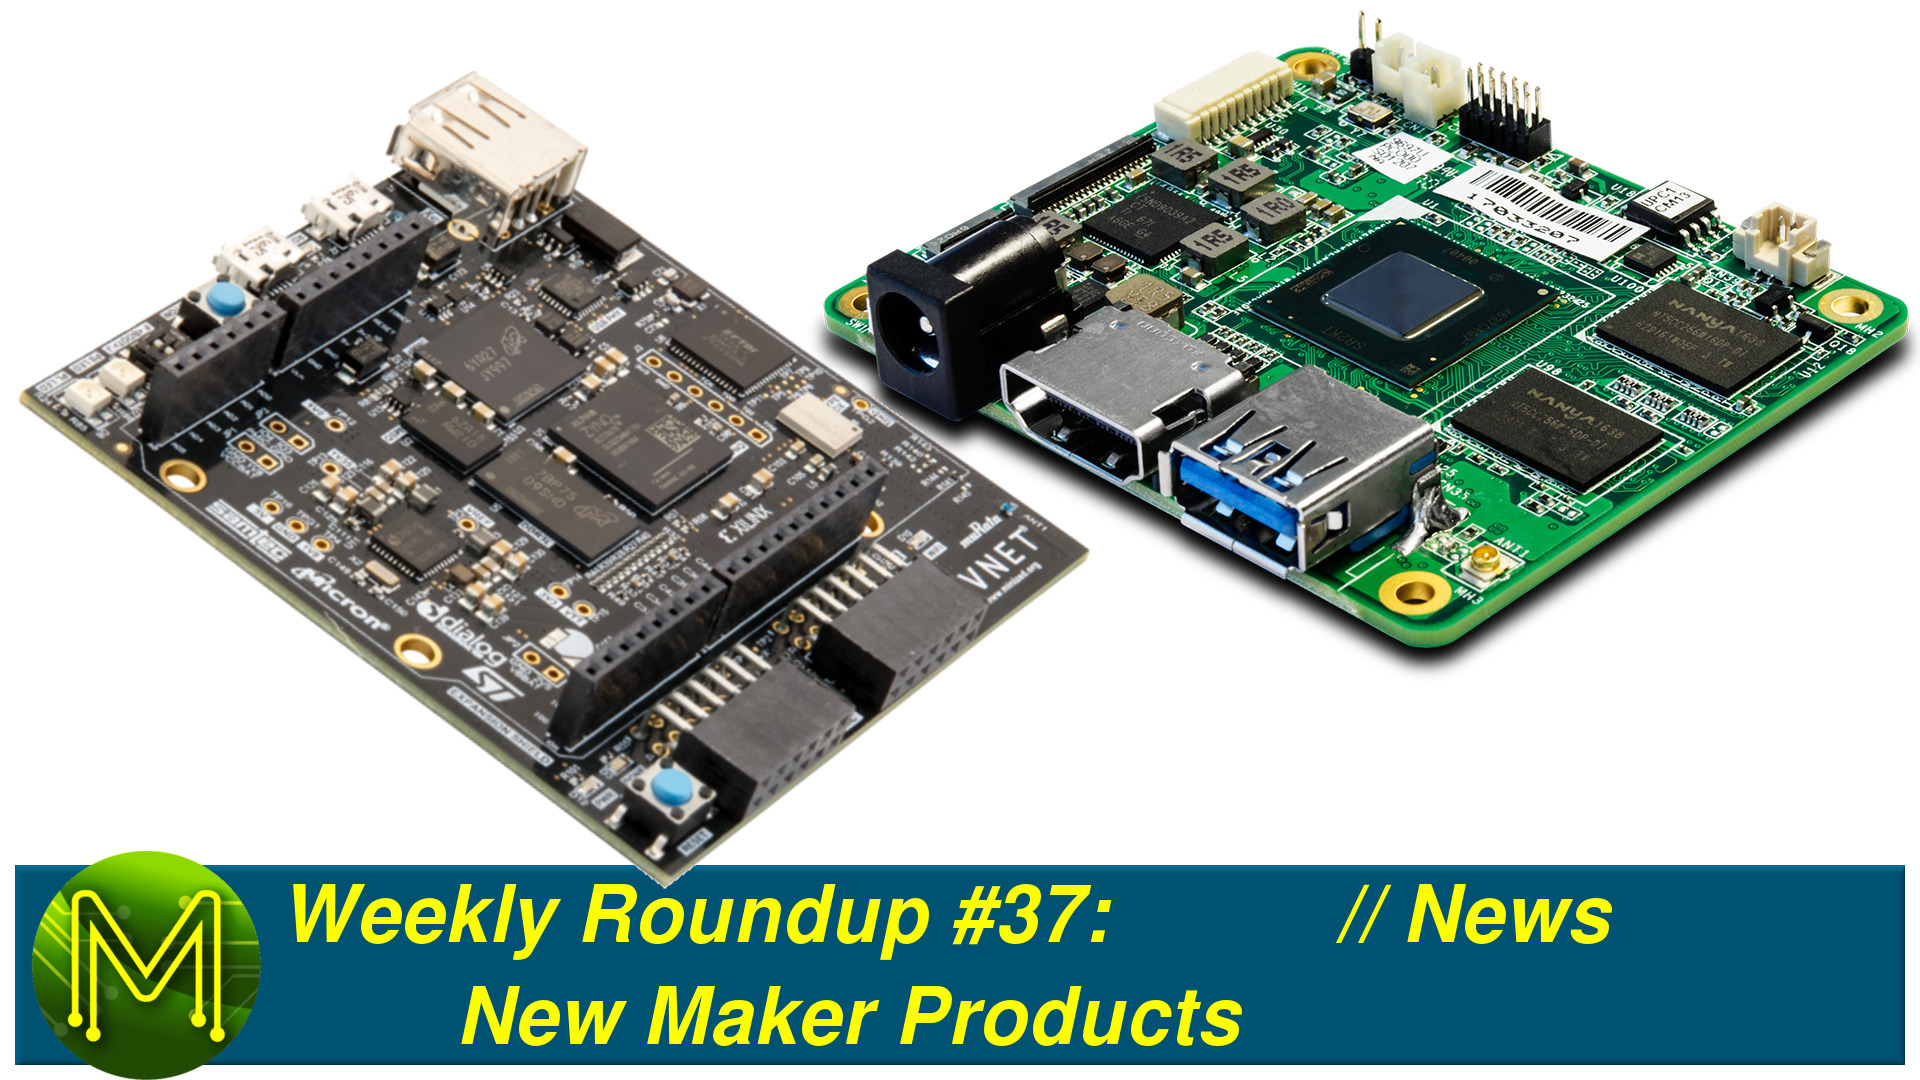 Weekly Roundup #37 - New Maker Products // News